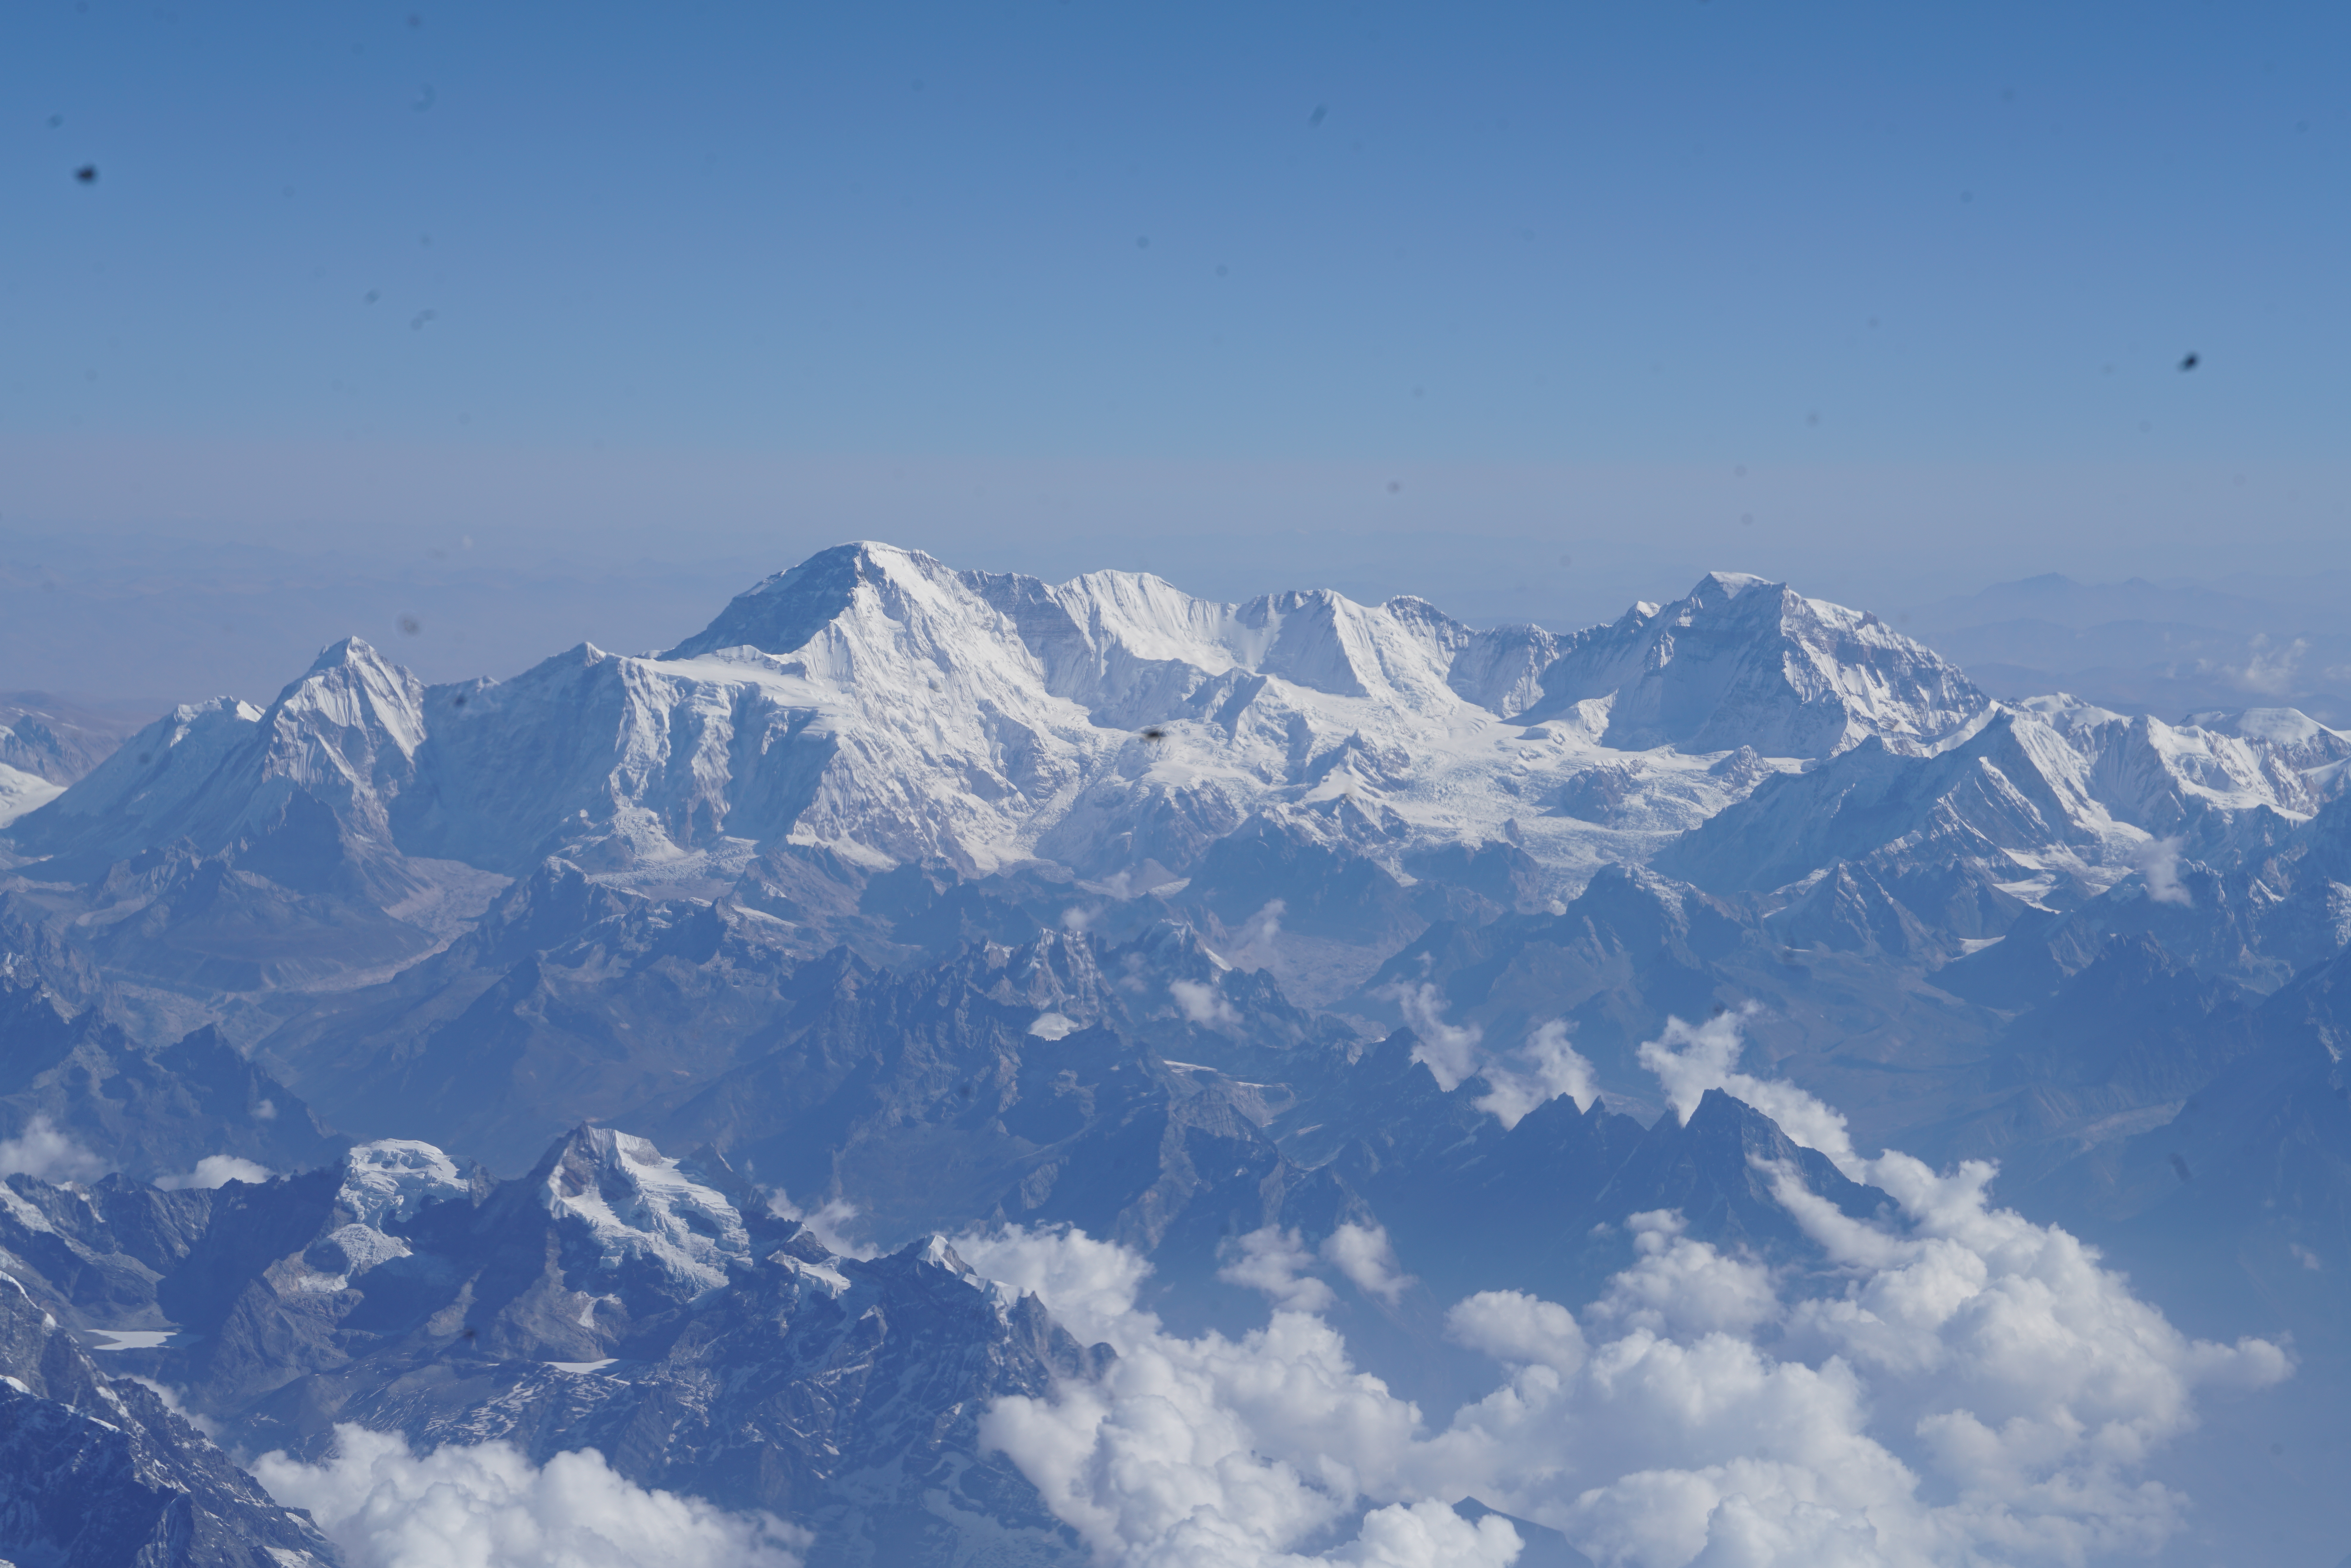 Crossing the Himalayas on the most spectacular flight in the world